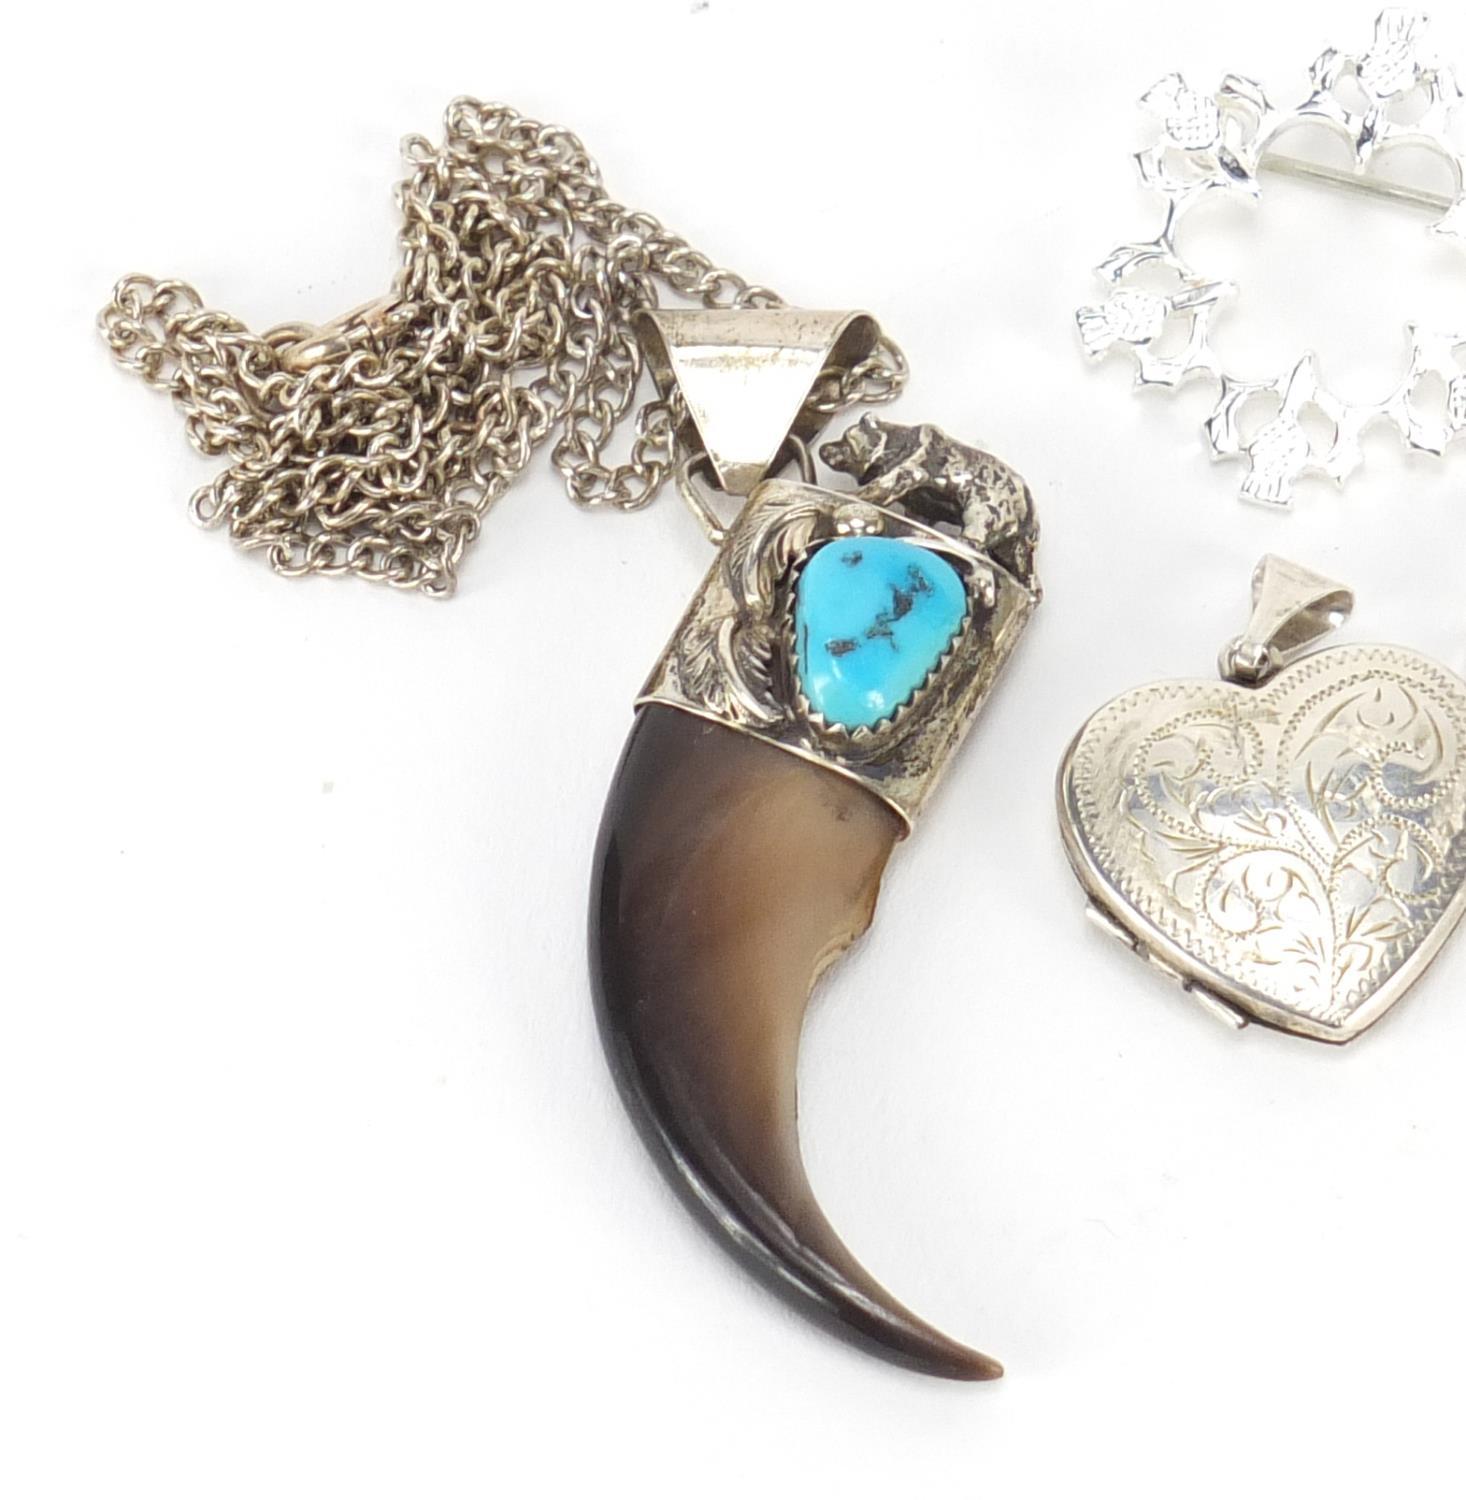 Mostly silver jewellery including a bear claw pendant and love heart locket, 43.0g : For Further - Image 2 of 3